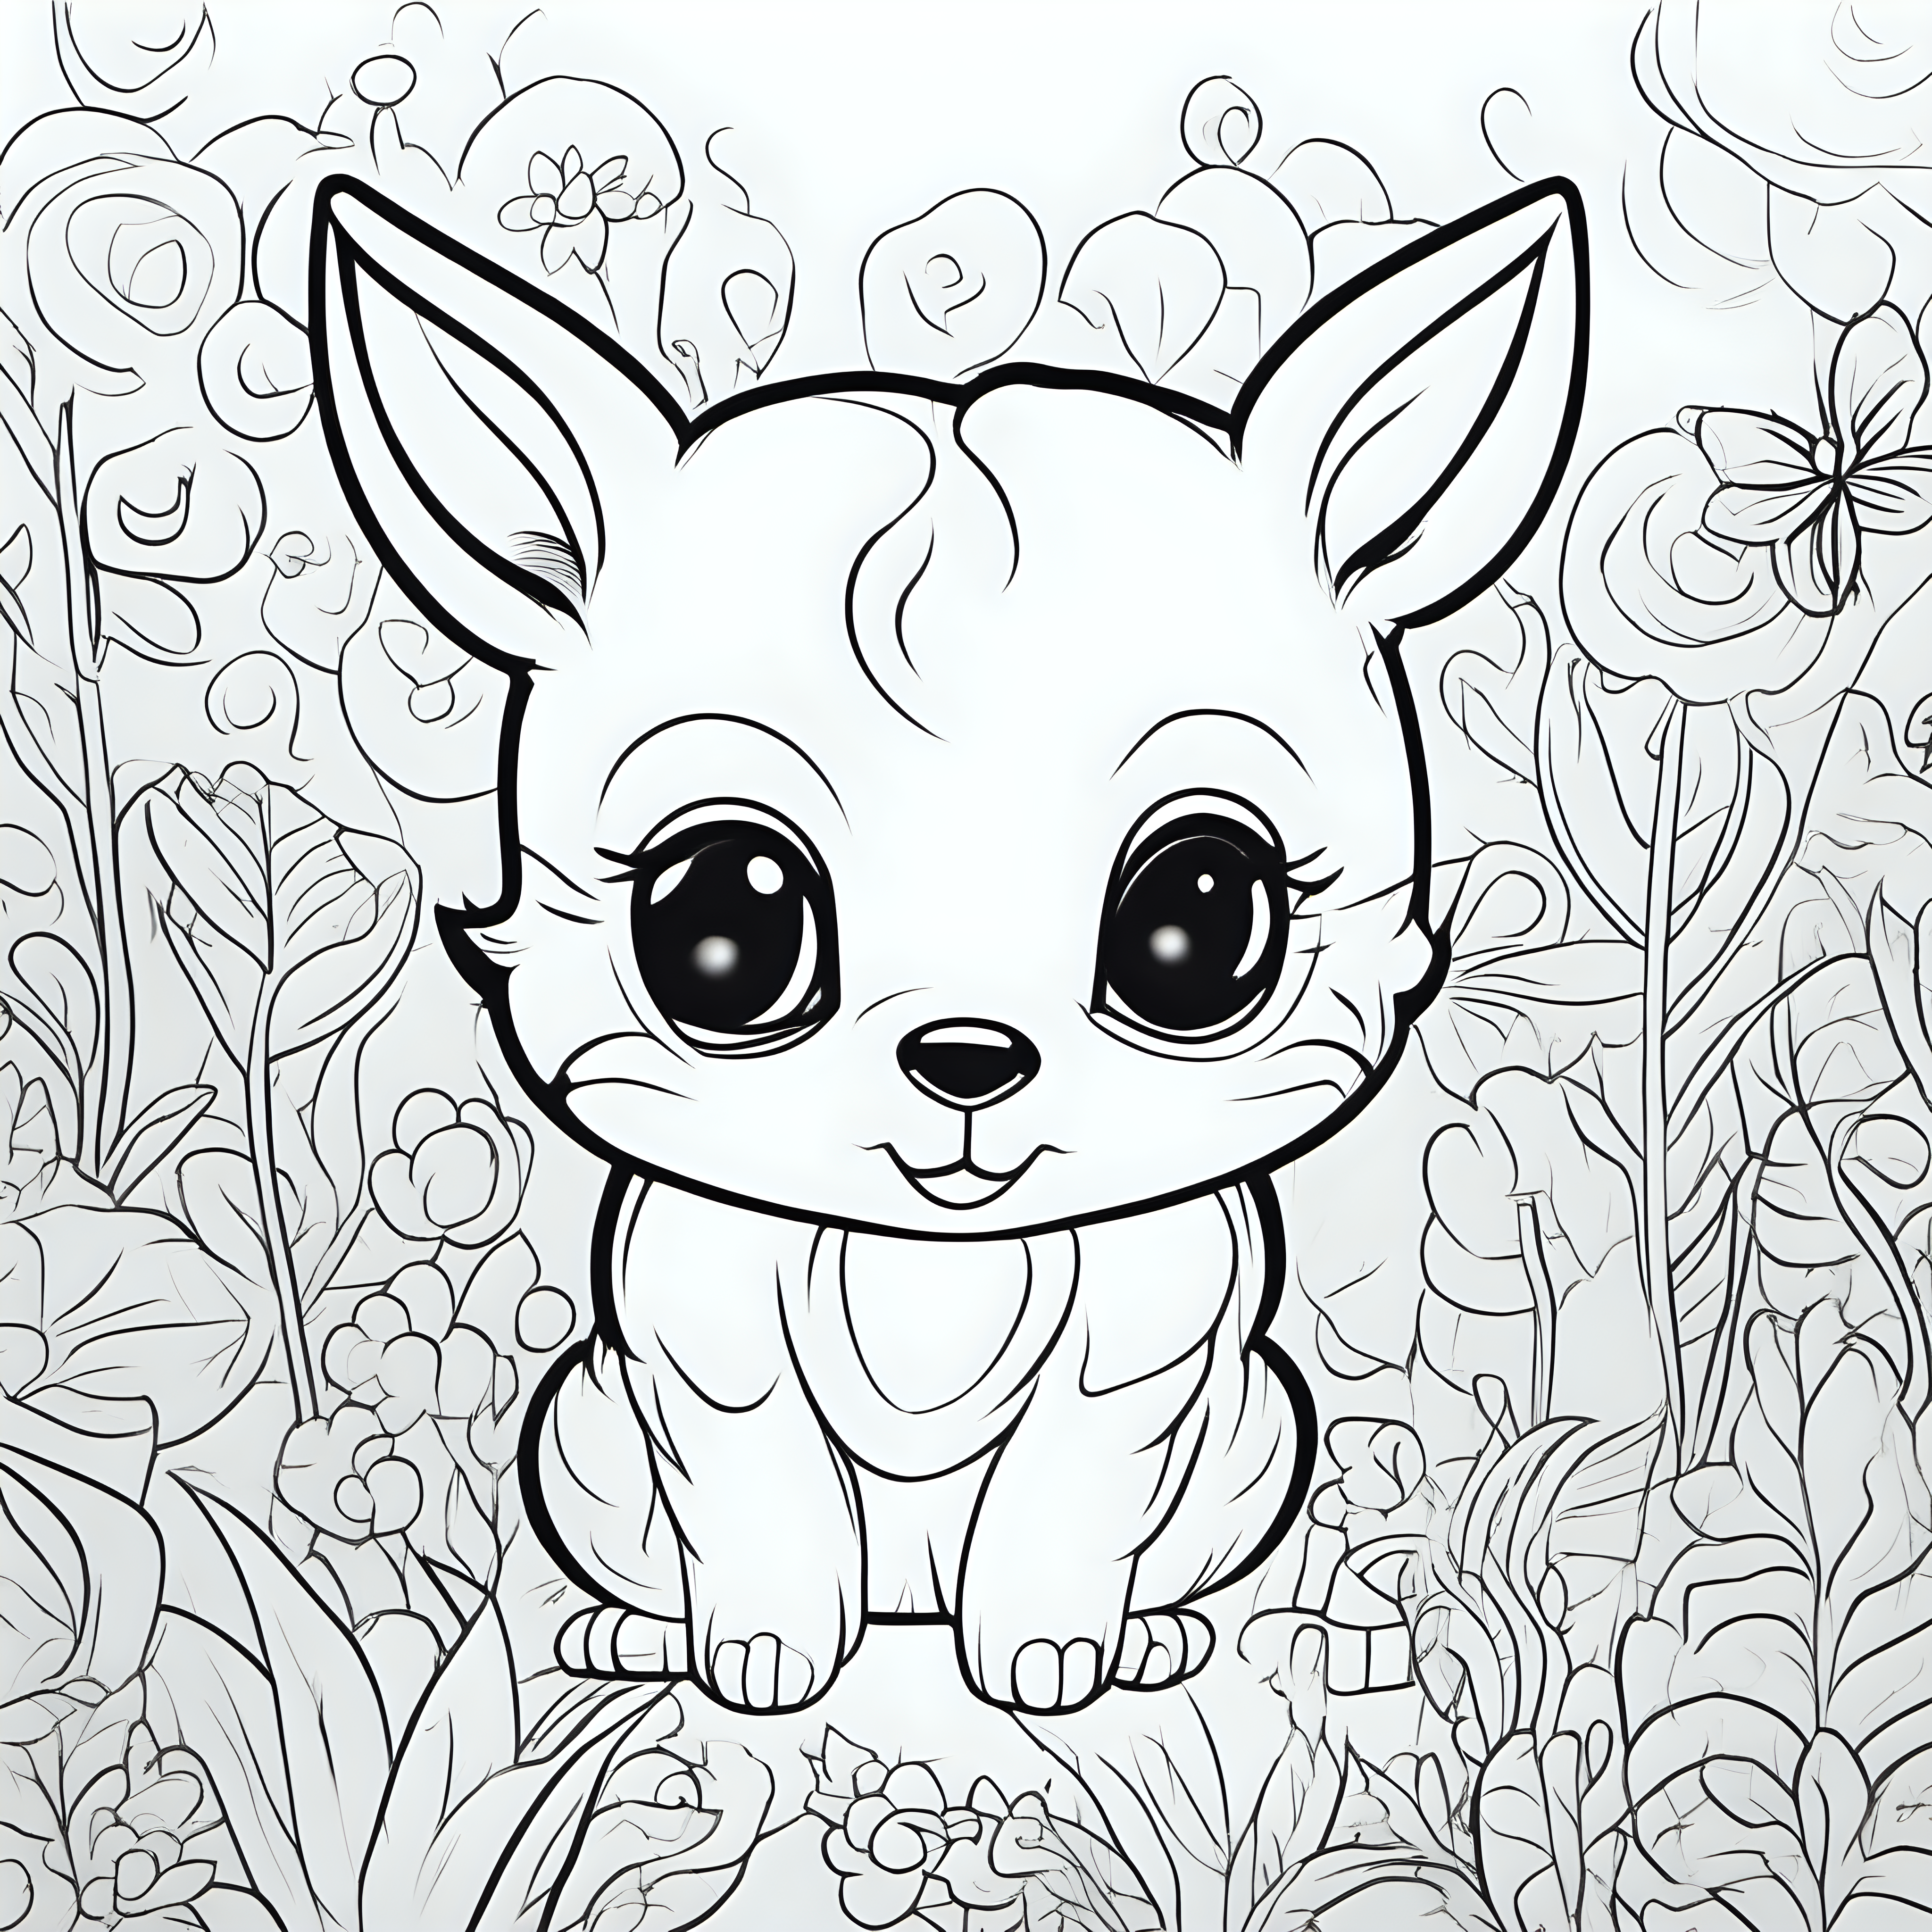 draw cute animals with only the well defined